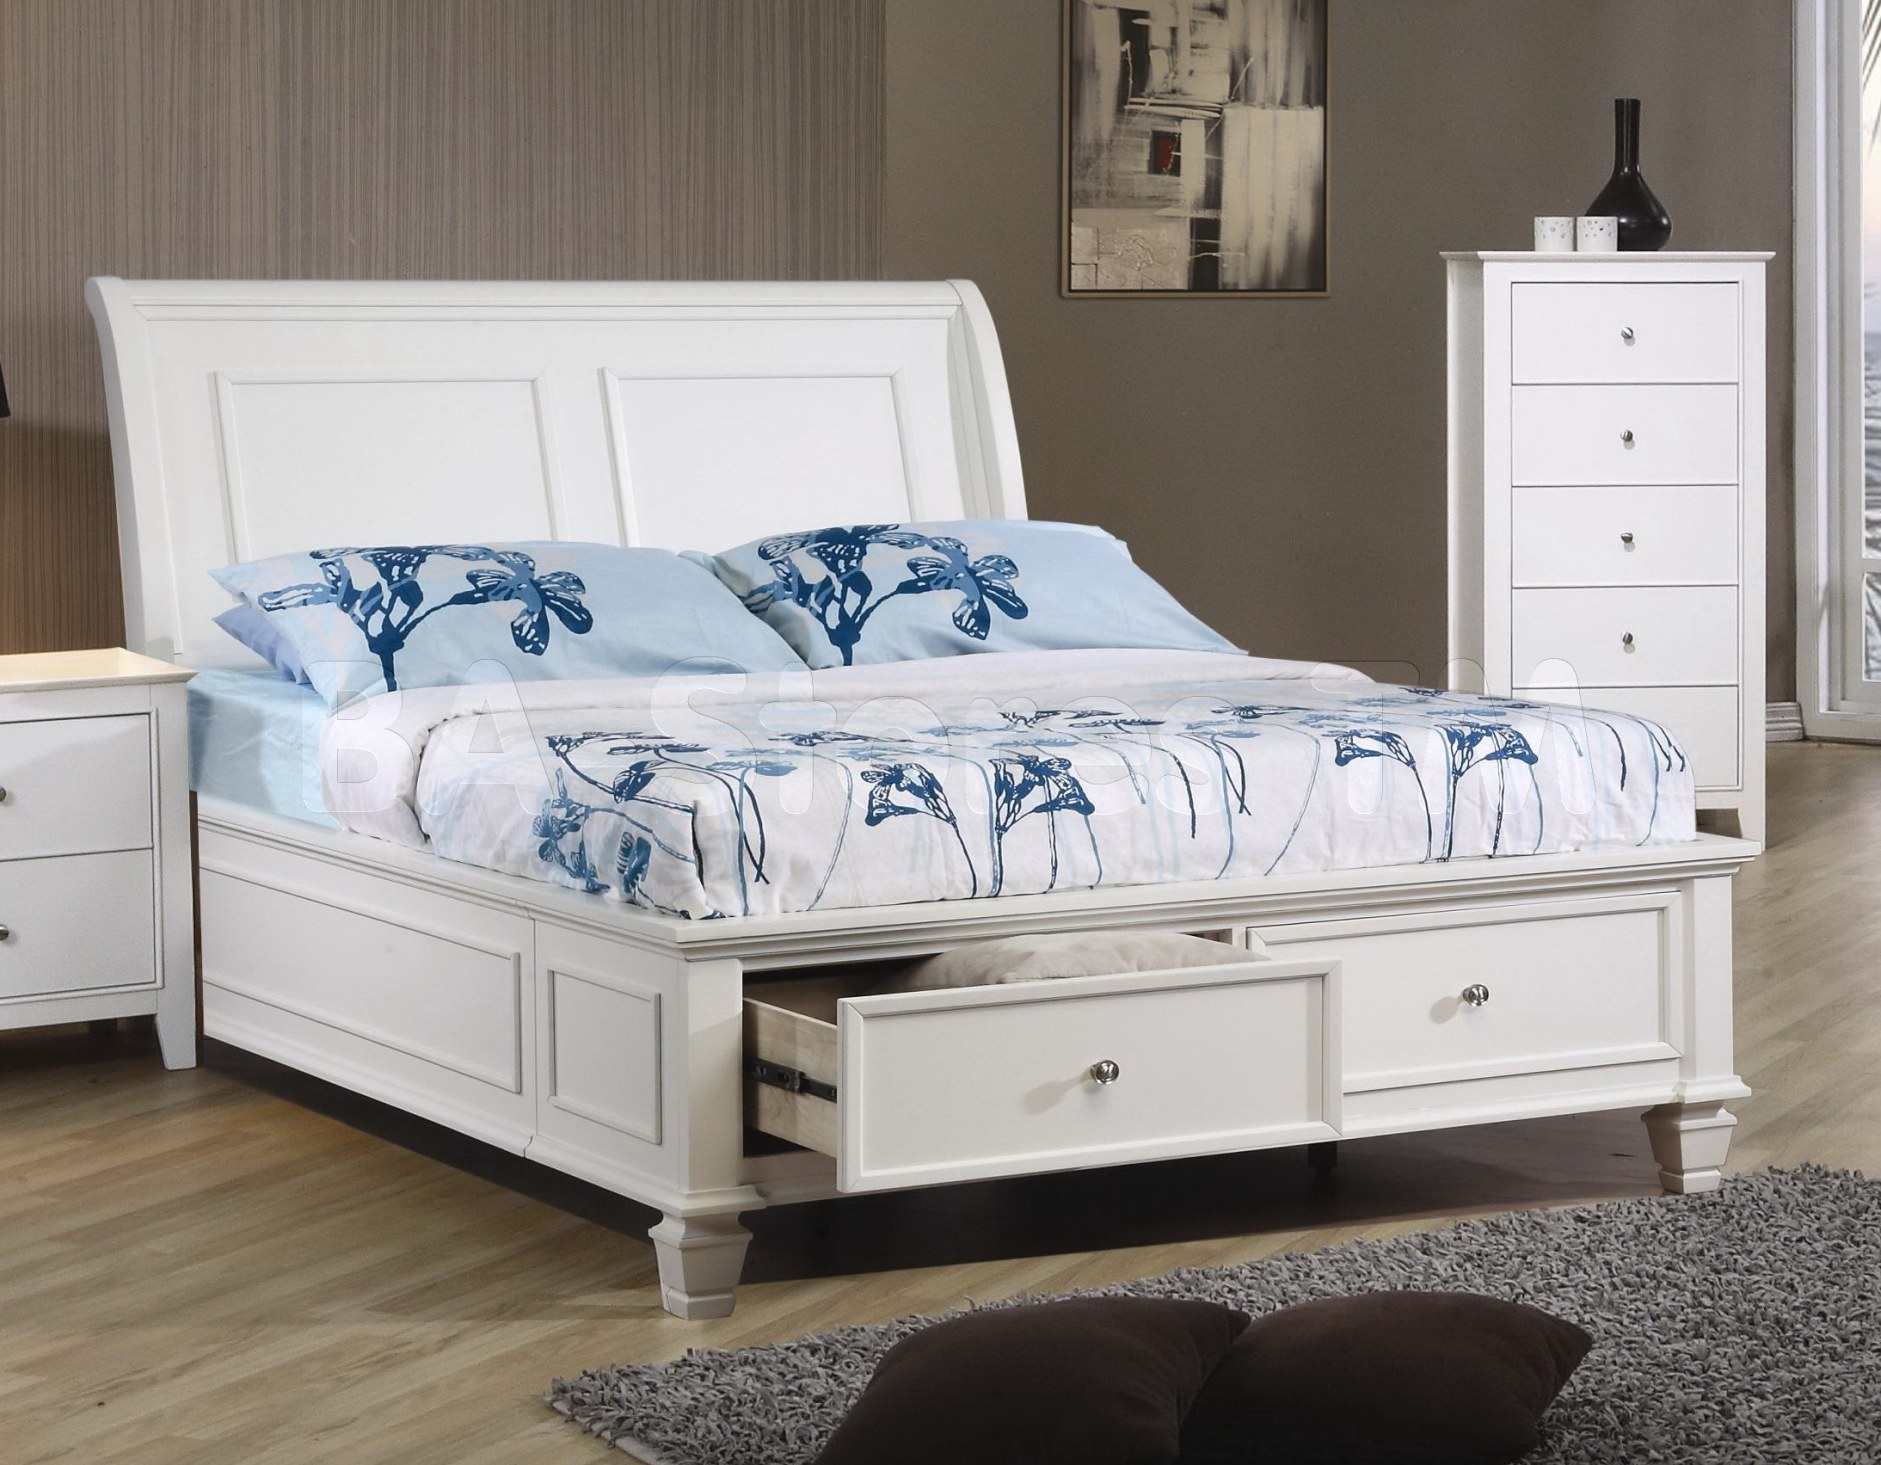 Td Furniture Bedroom Sets Best Furniture For All Home Types in proportions 1881 X 1465